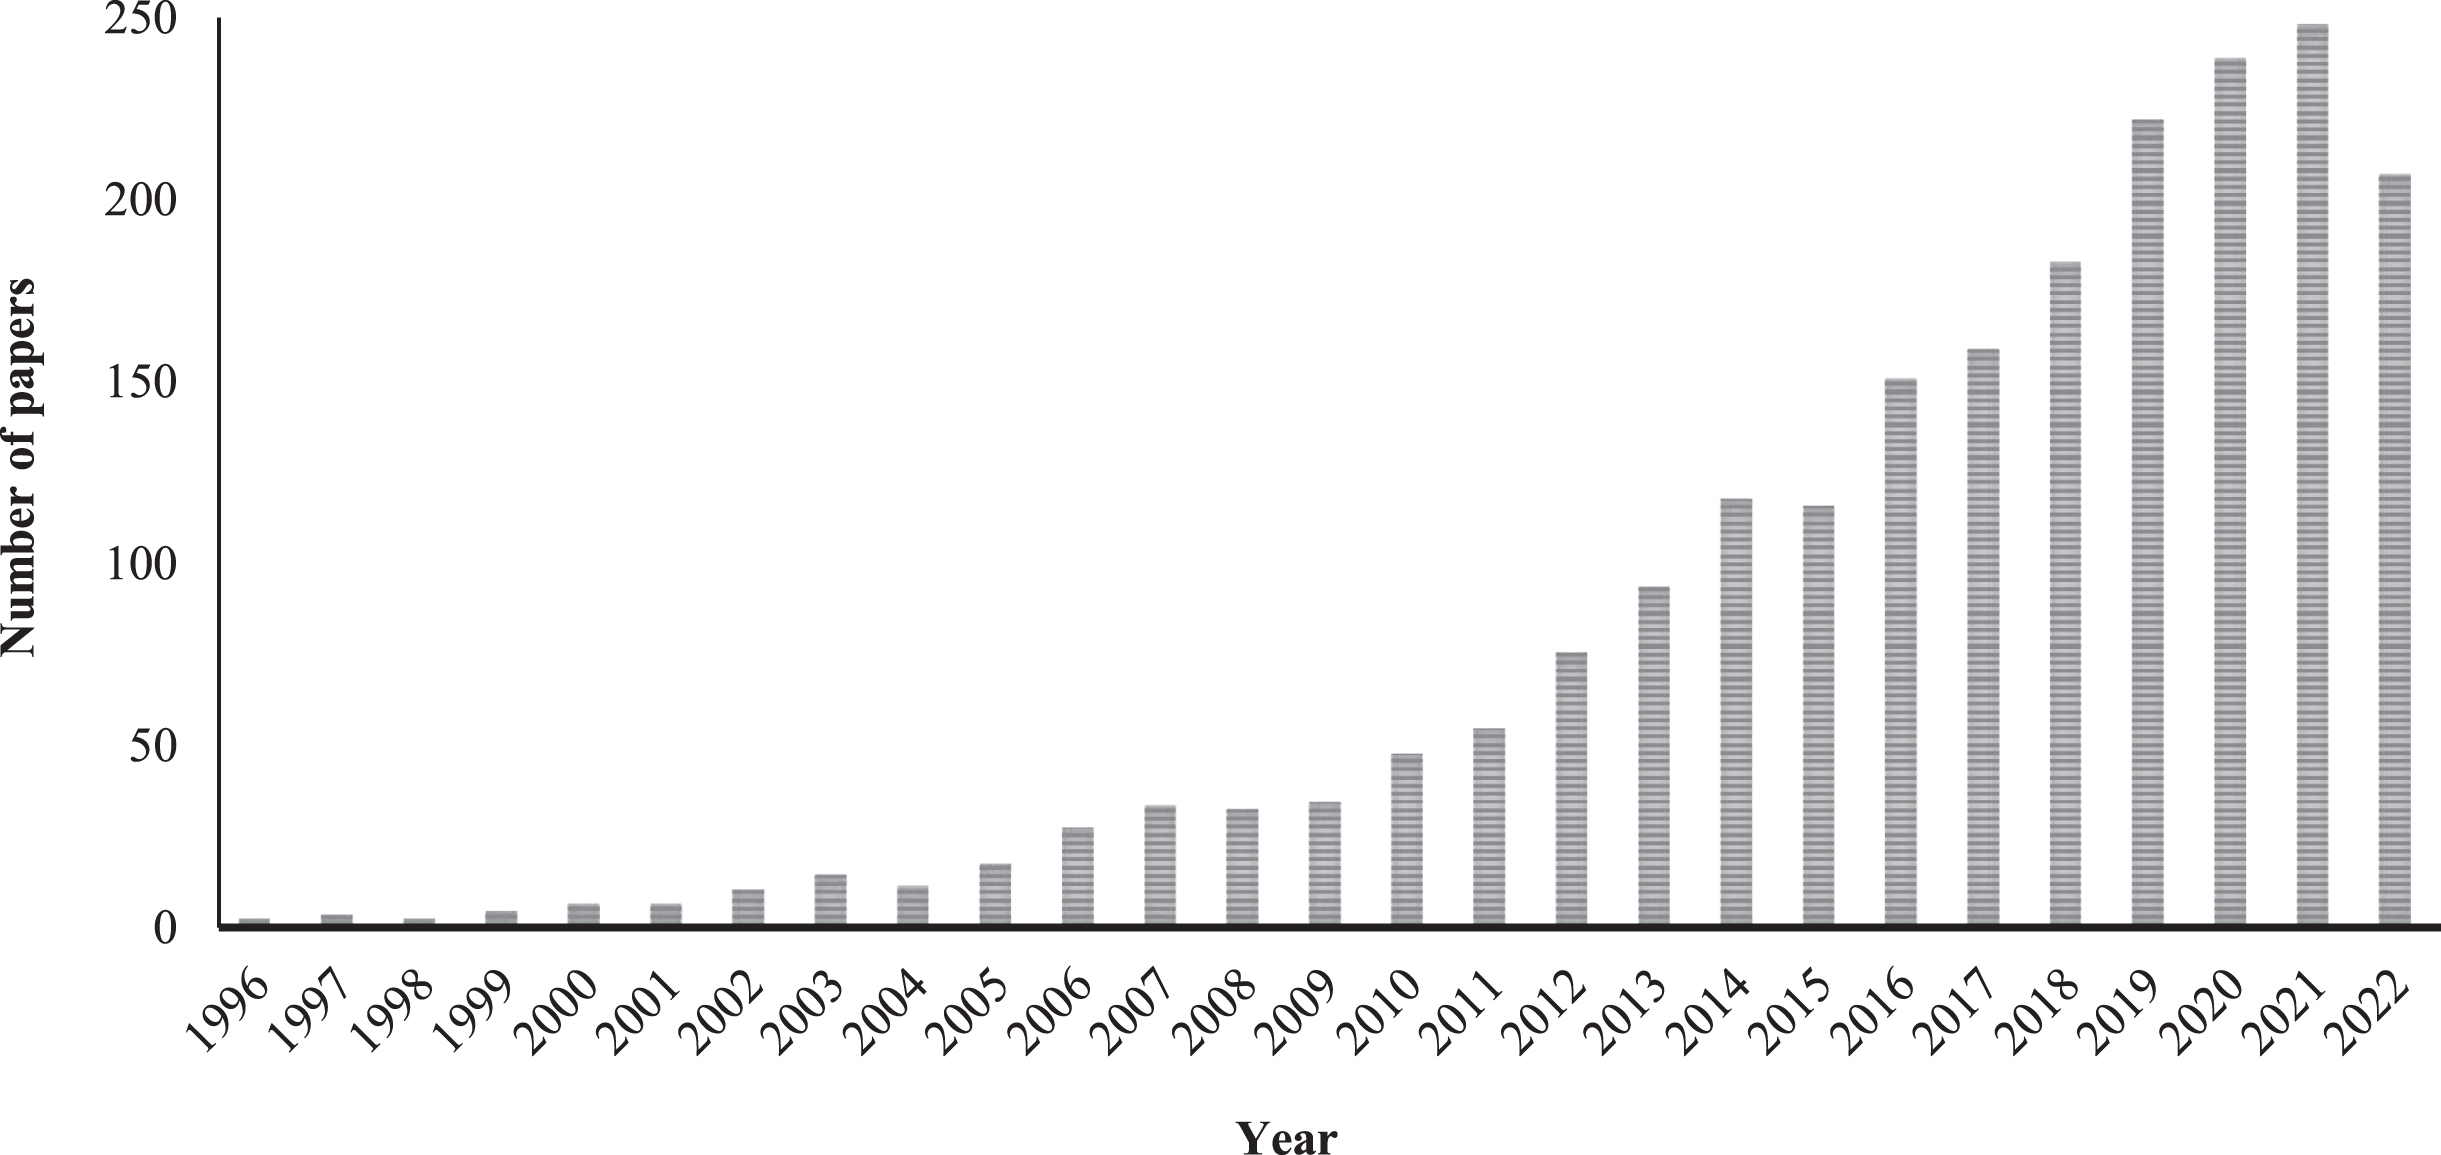 Number of papers published on PubMed from 1996 and focused on anthocyanins and health effects.